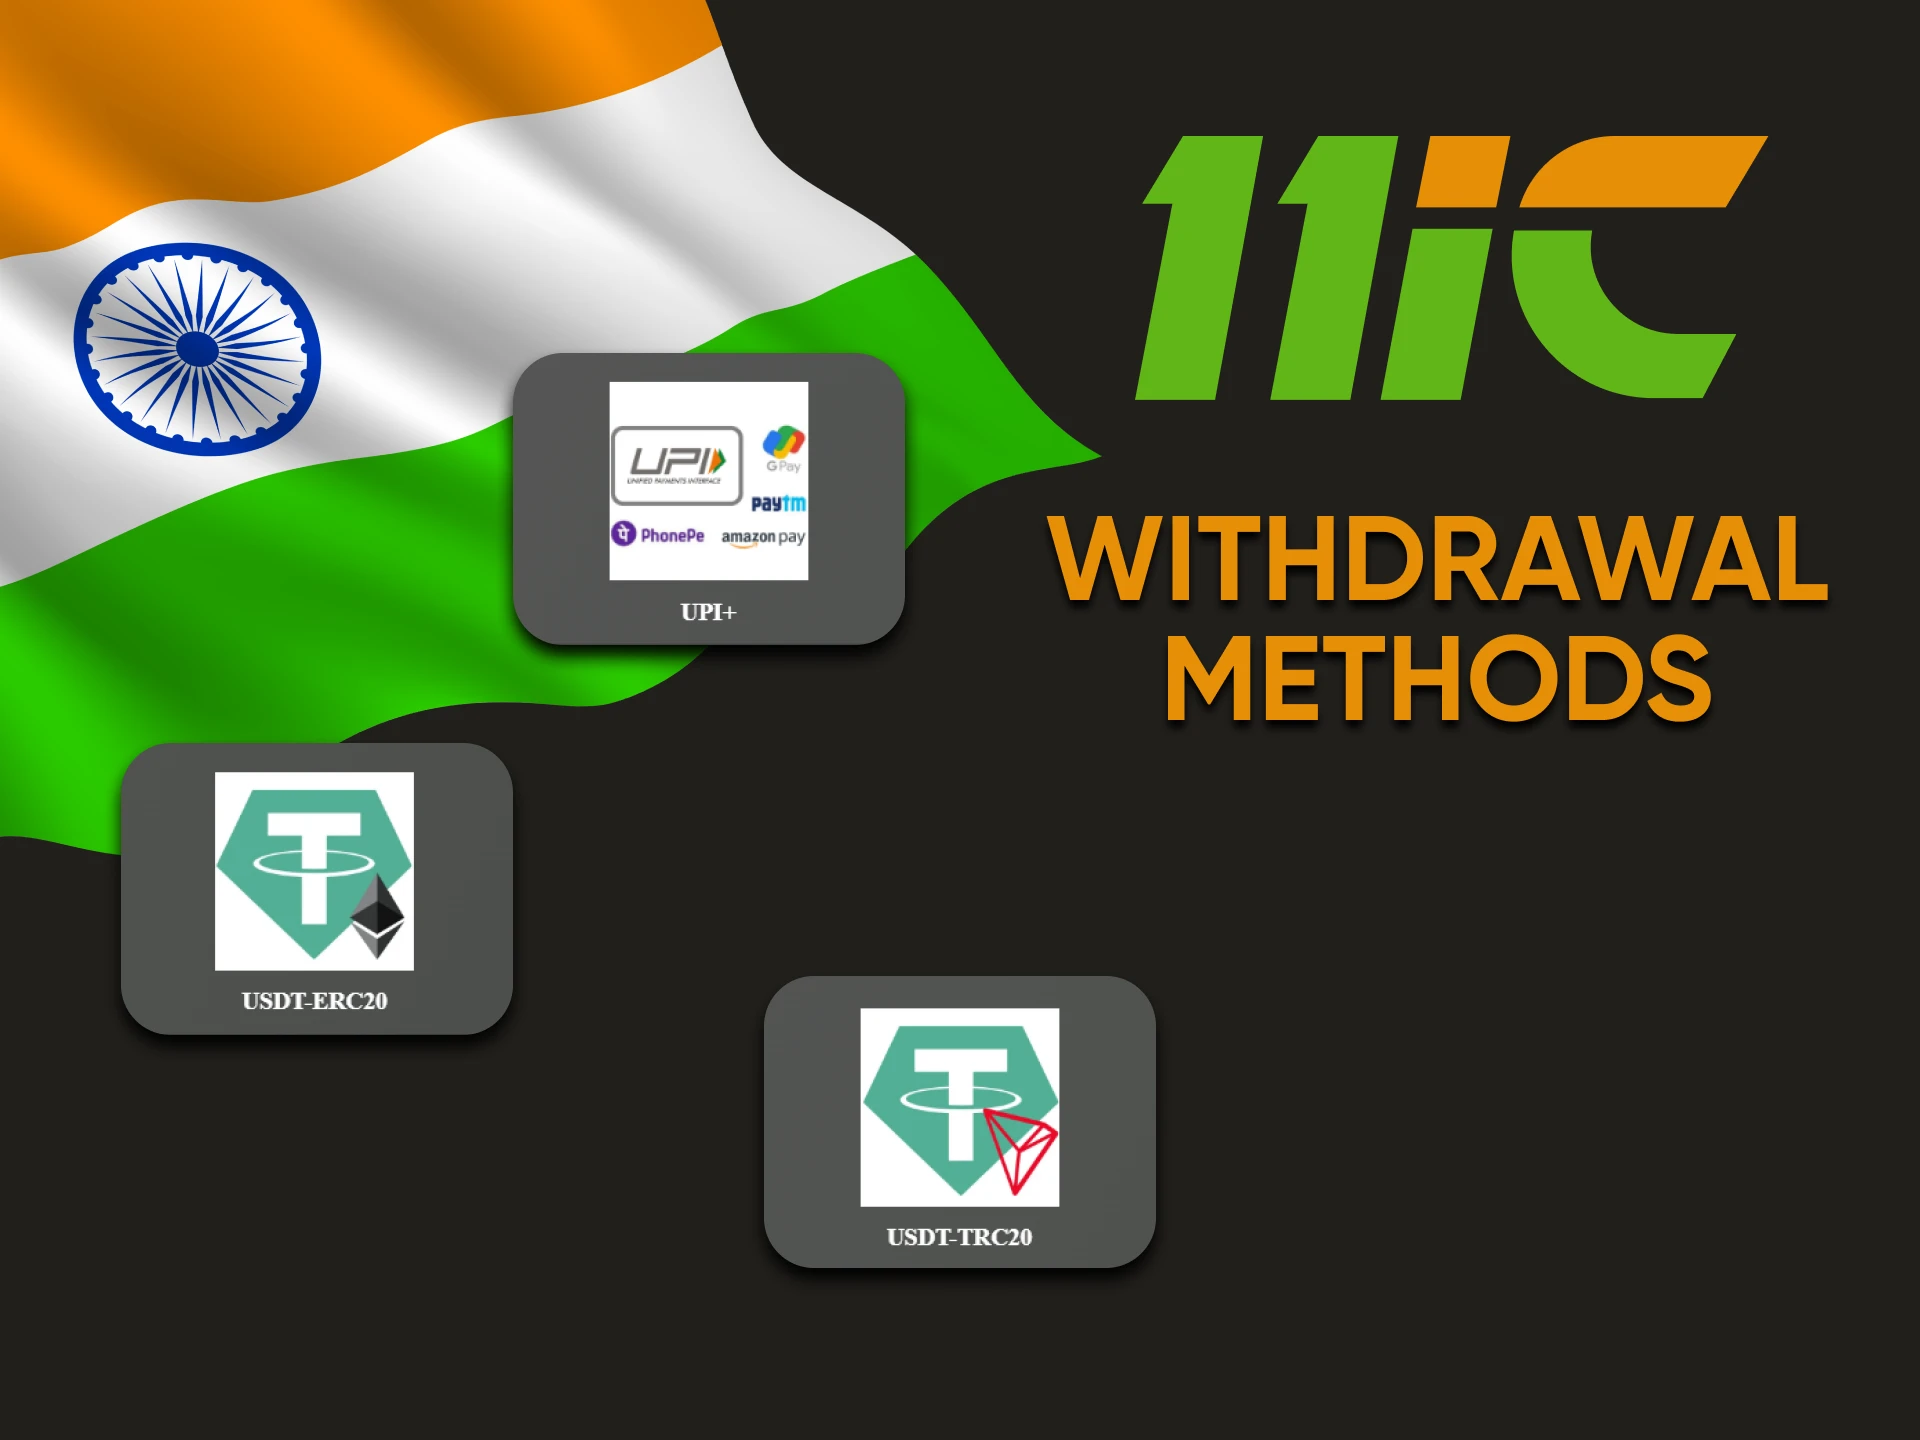 Choose your withdrawal method on 11ic.